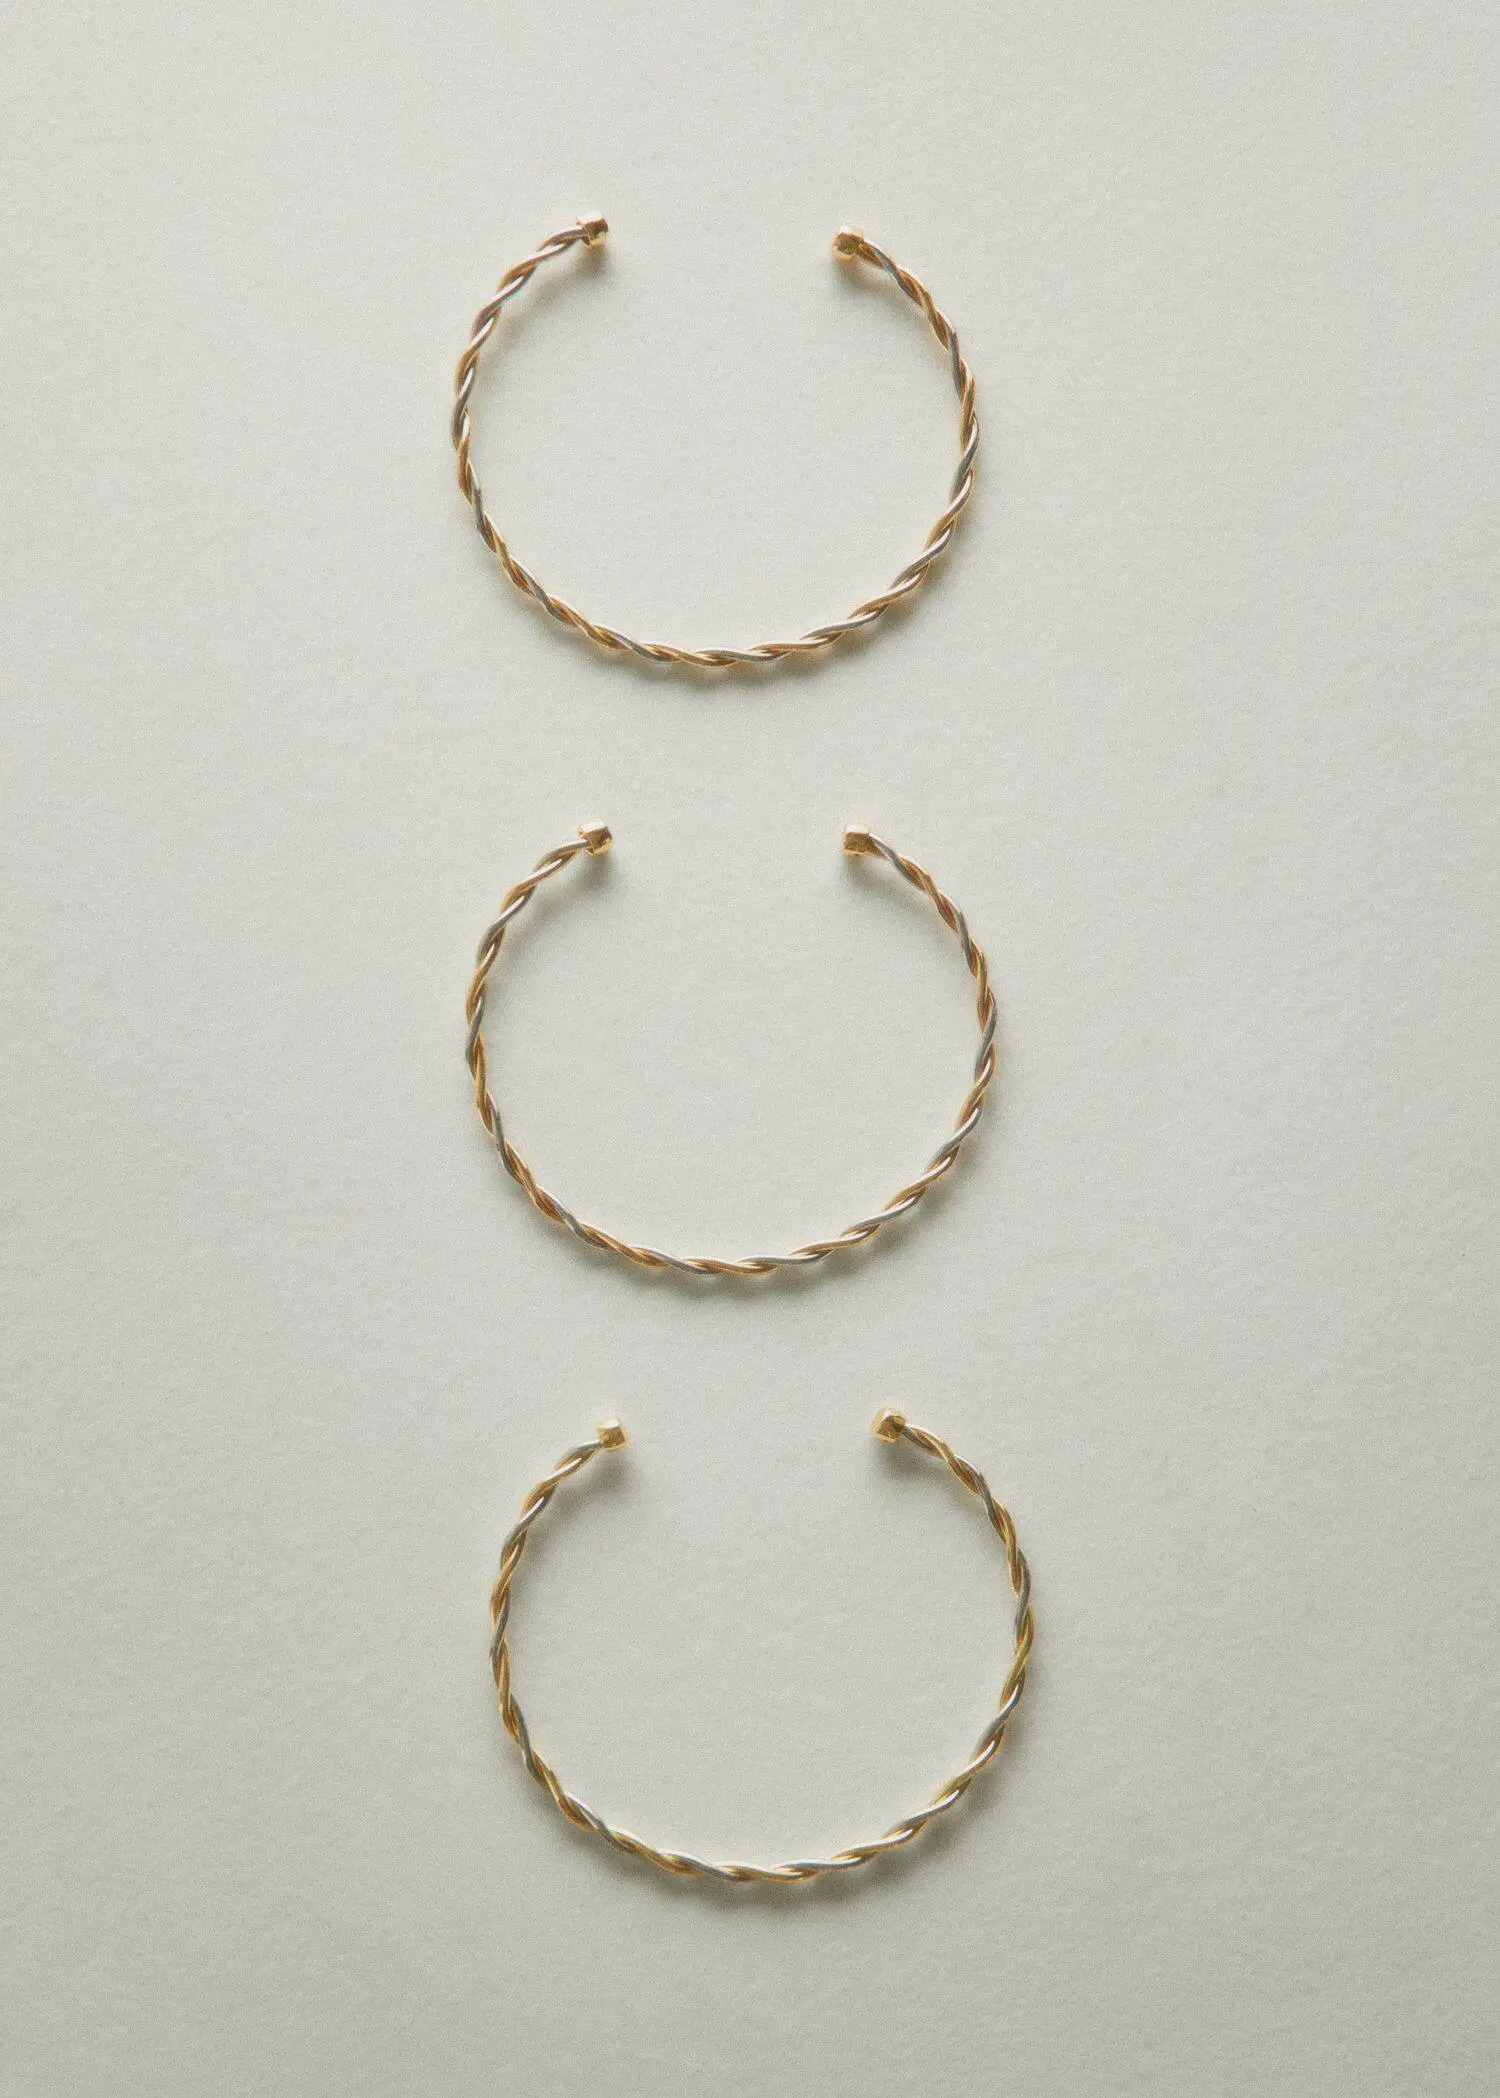 Mango Criss-cross rigid necklace. three bracelets are shown on a white surface. 